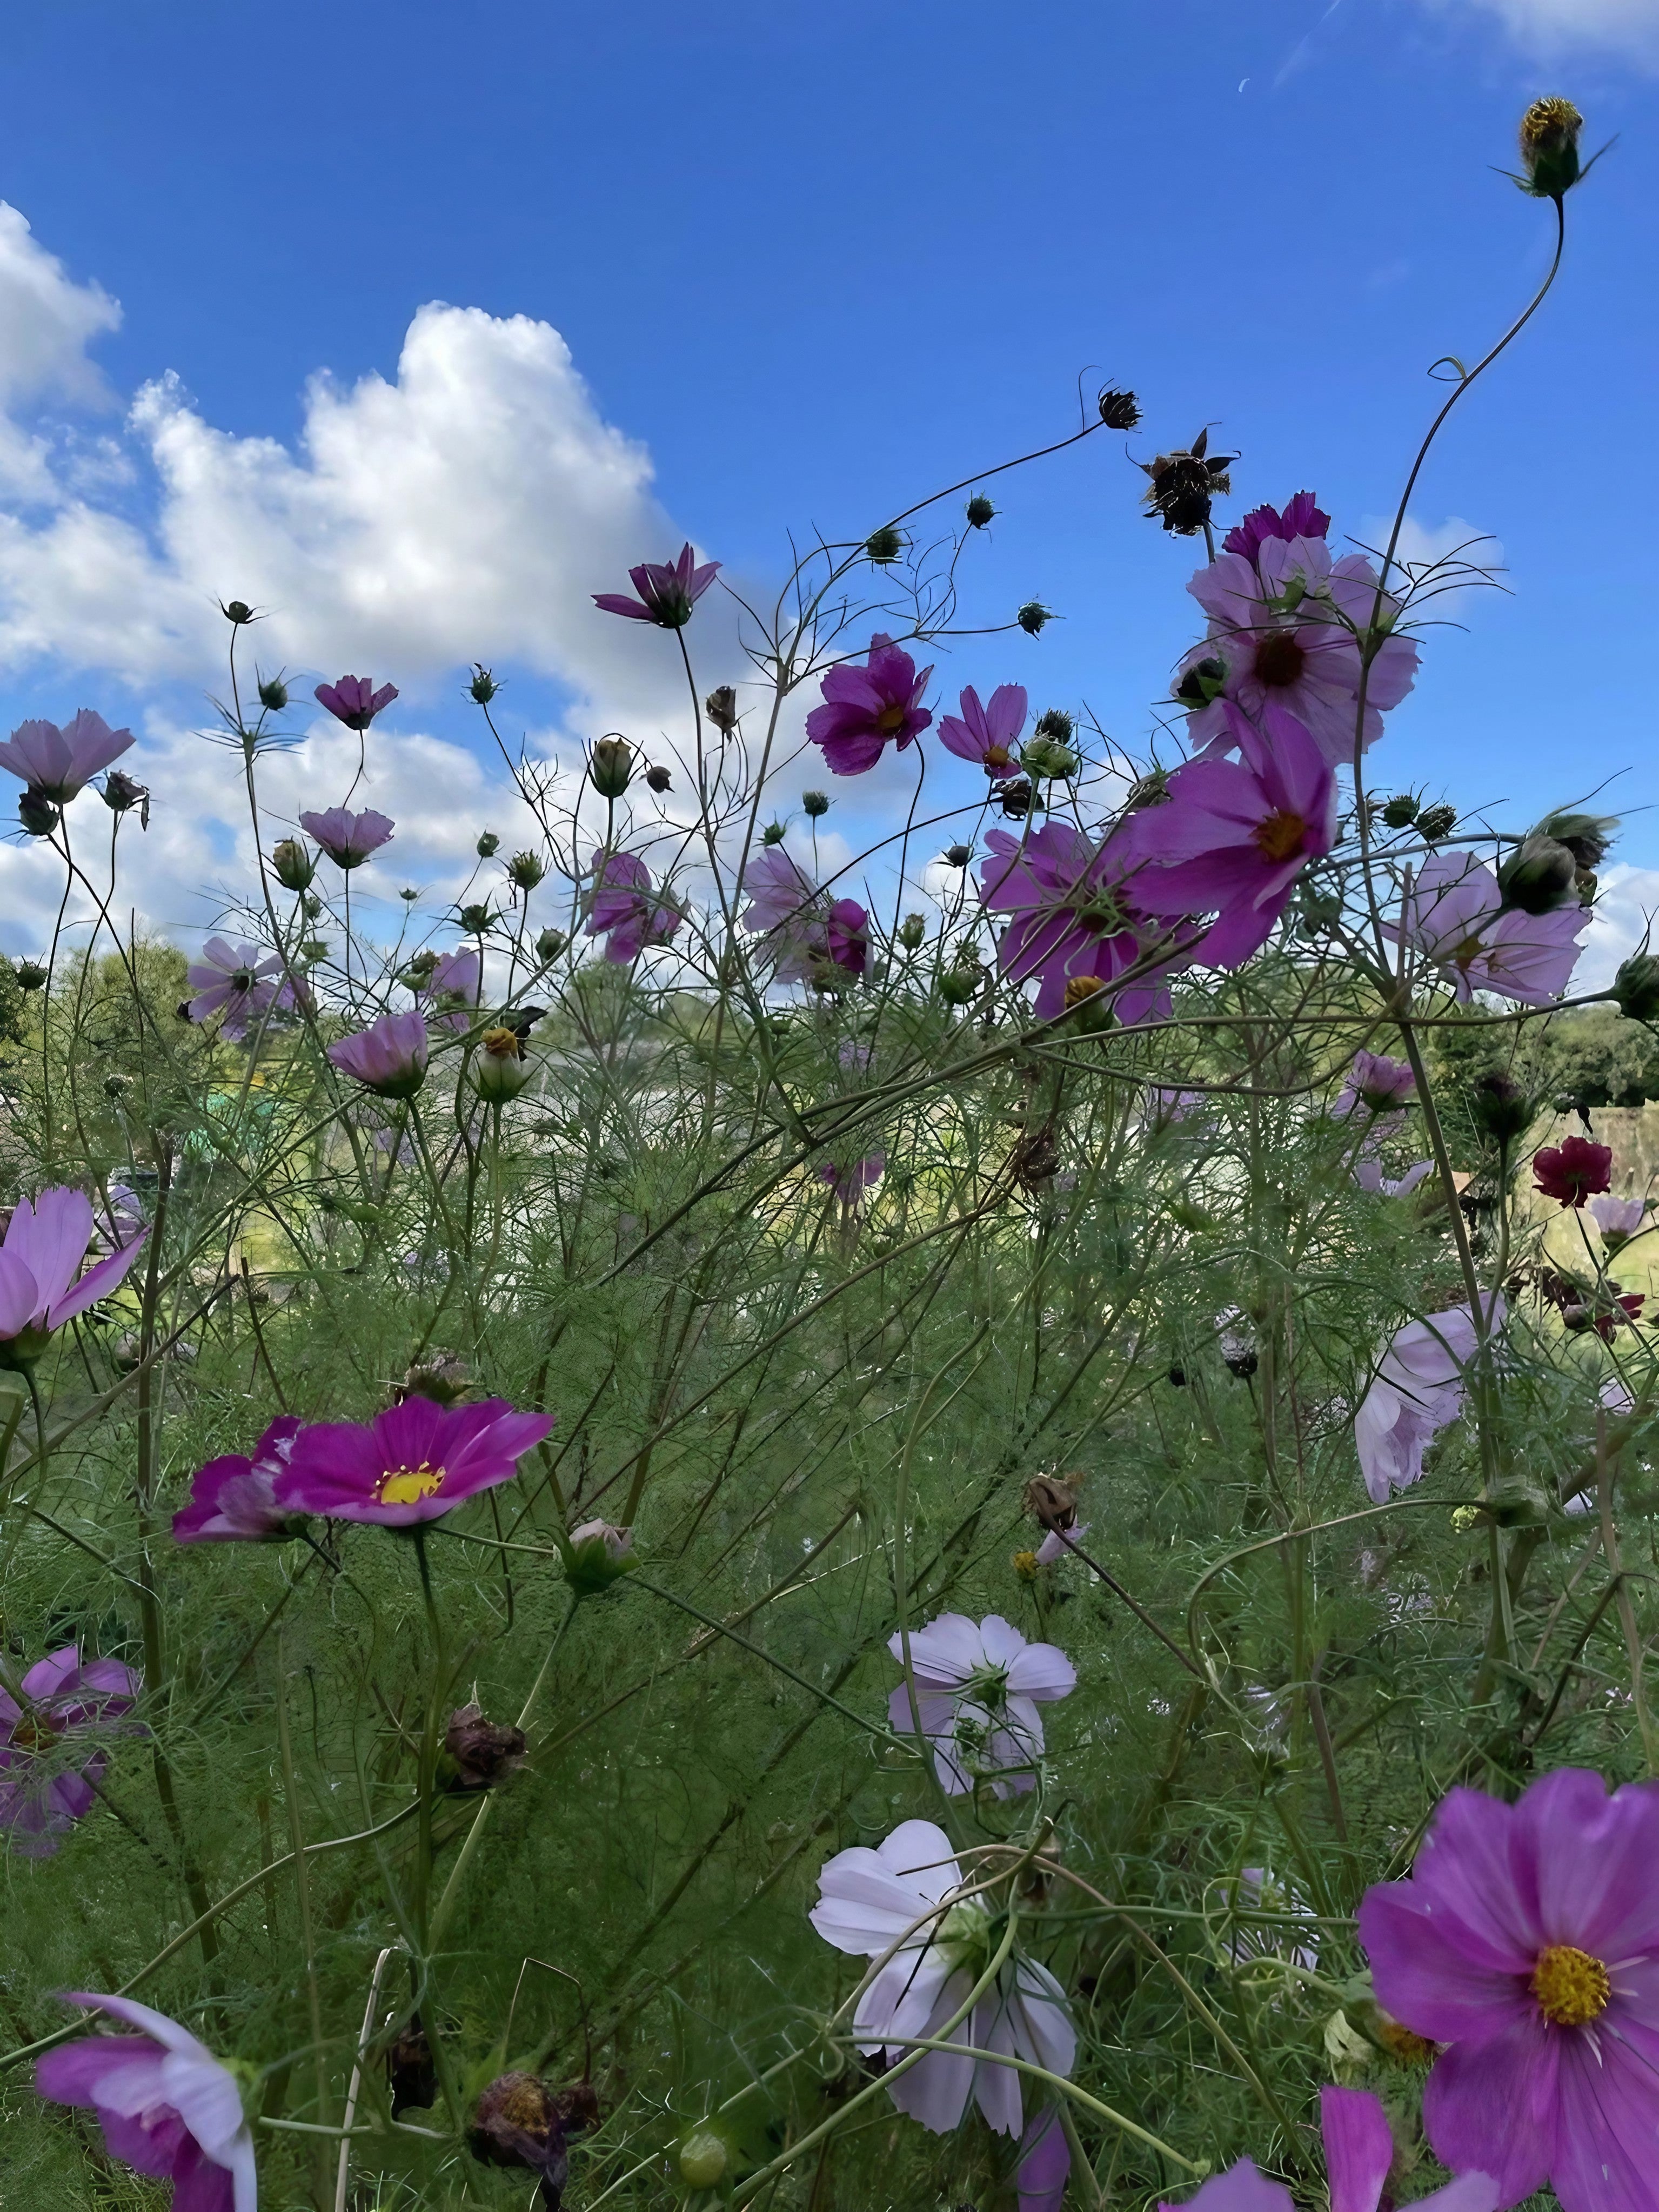 Field of Cosmos Sensation Mixed flowers under clear blue skies